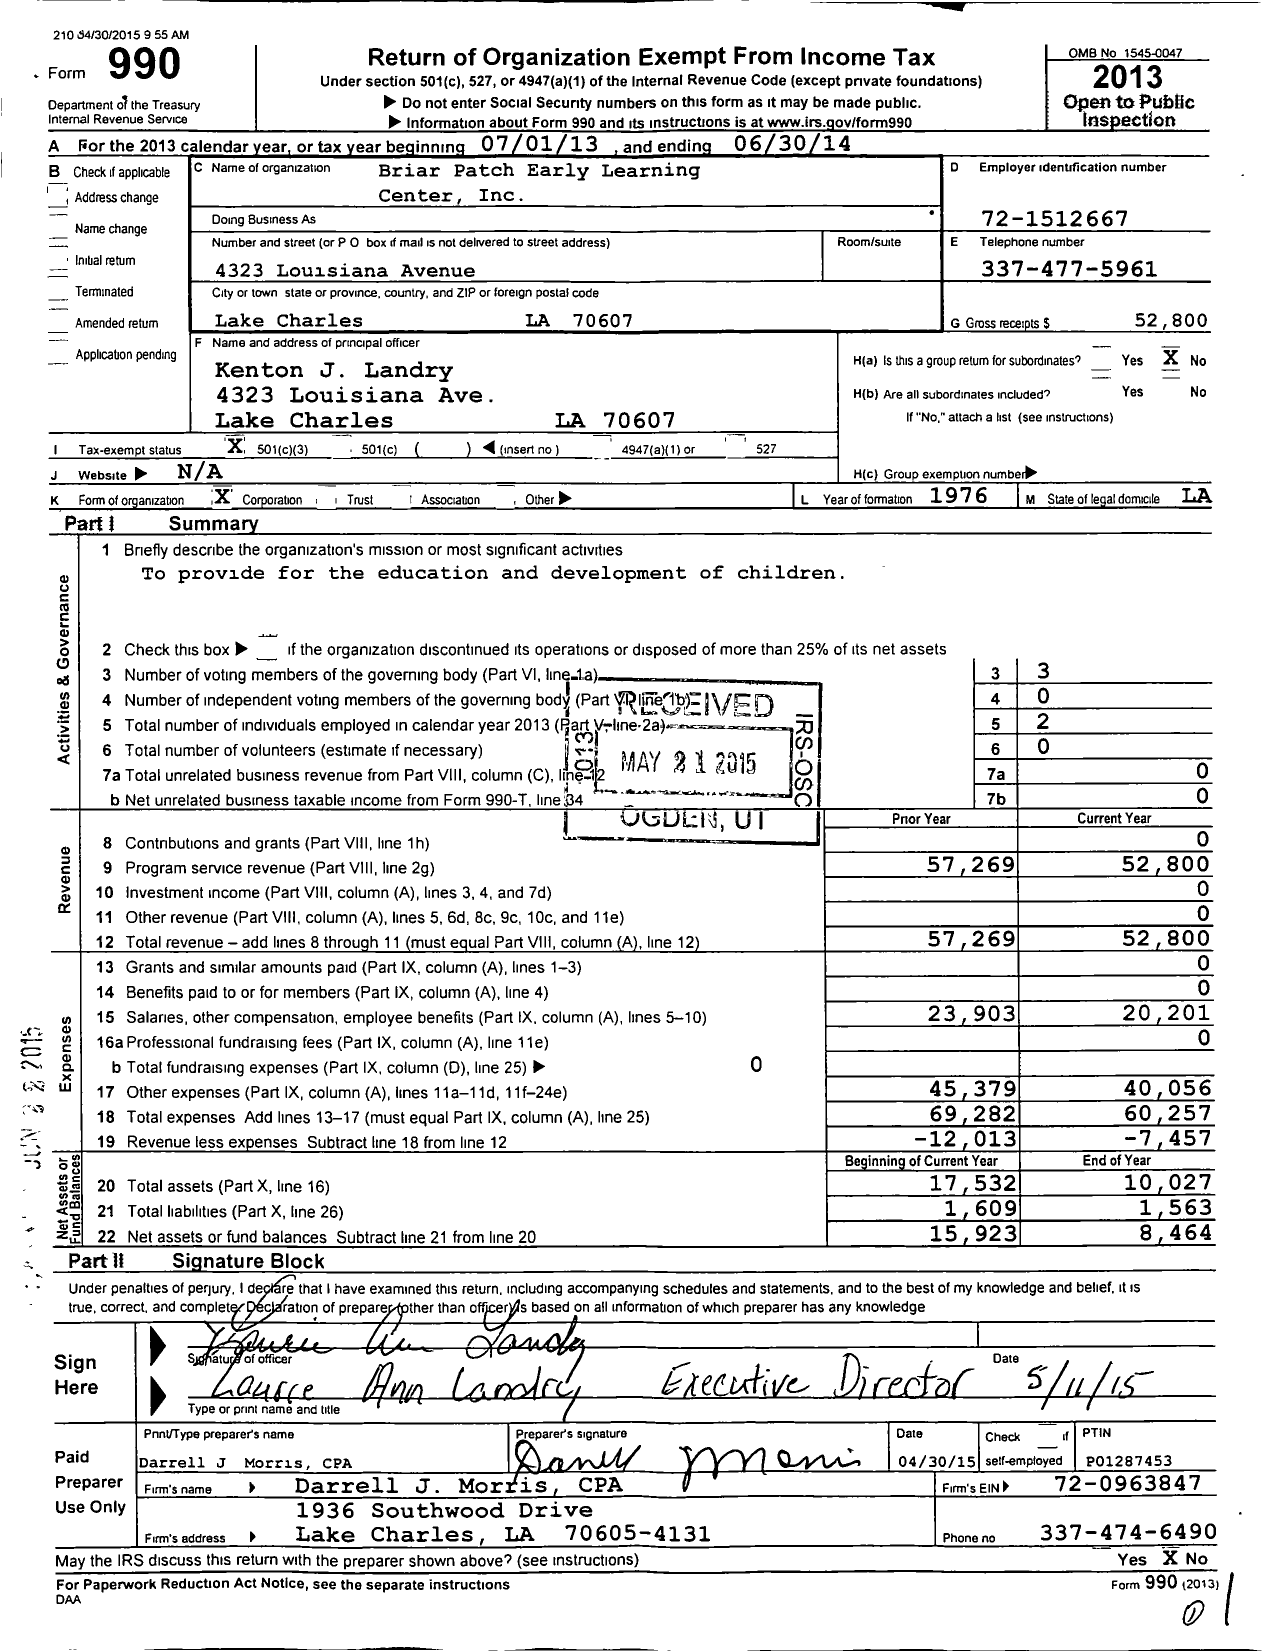 Image of first page of 2013 Form 990 for Briar Patch Early Learning Center